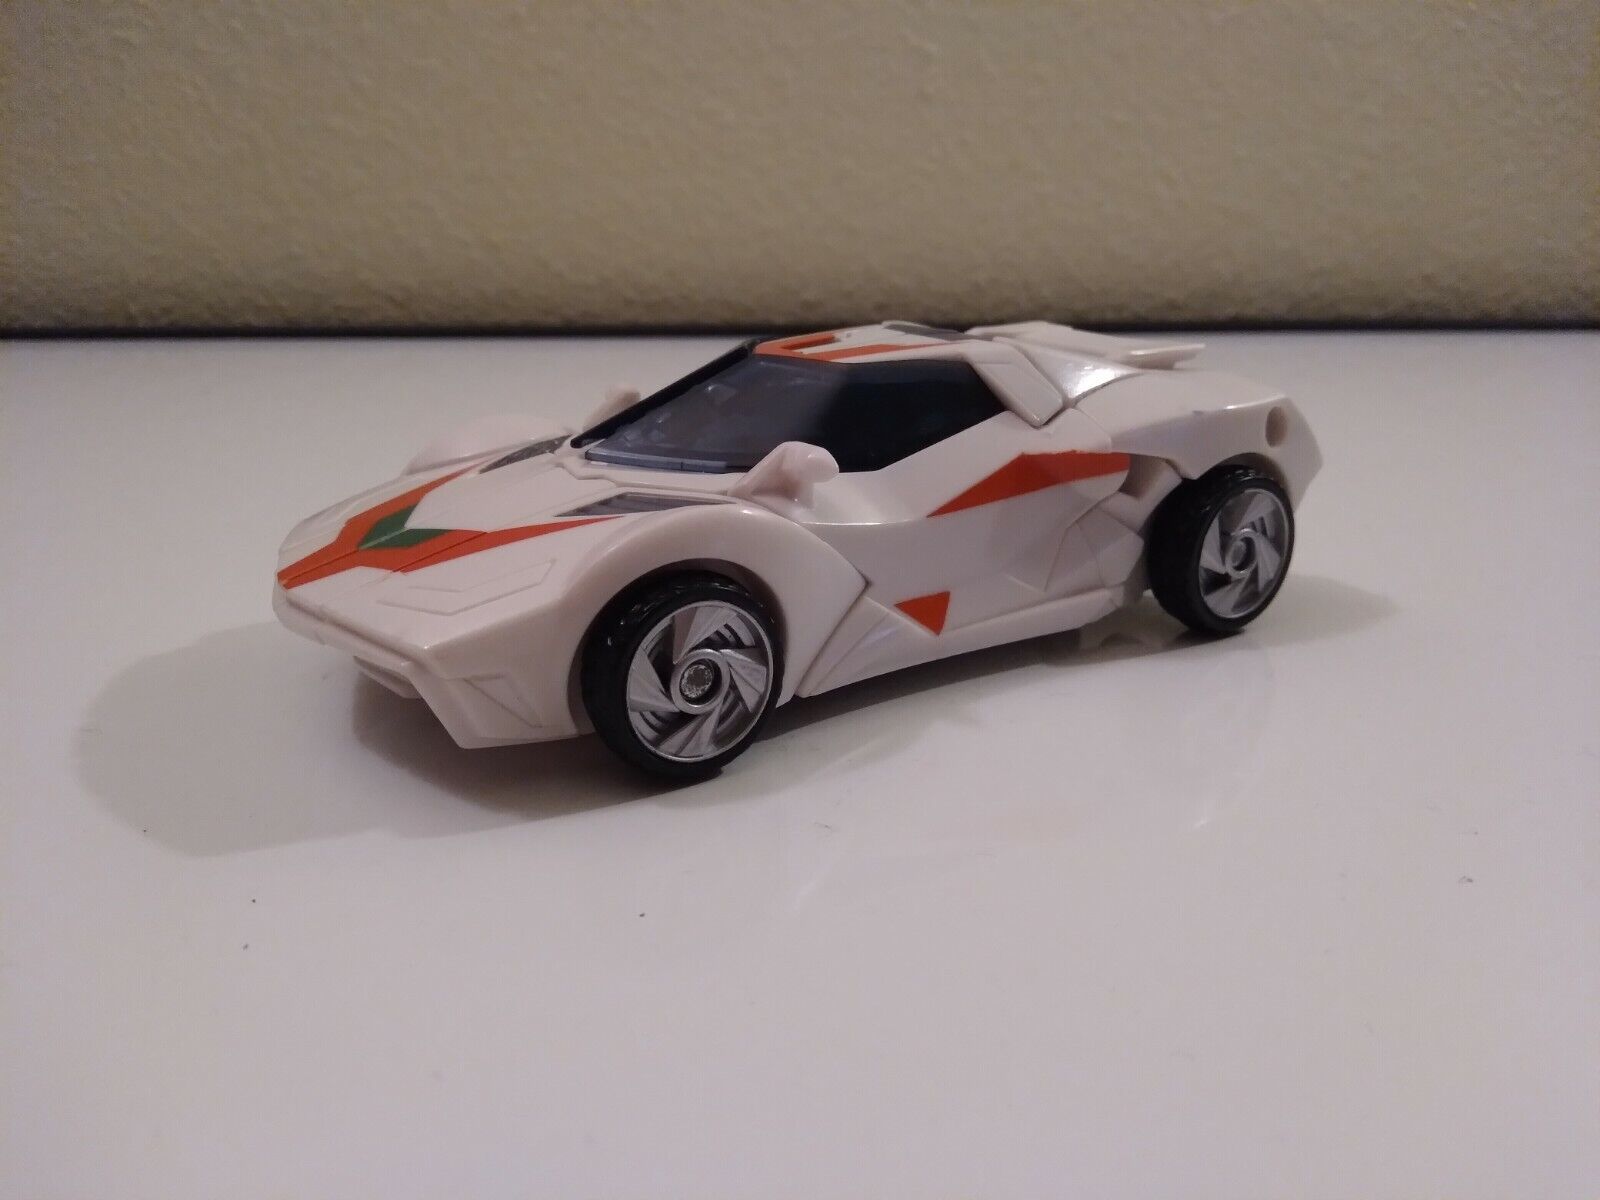 Transformers Prime Robots in Disguise (RID) Deluxe Class WHEELJACK  Hasbro